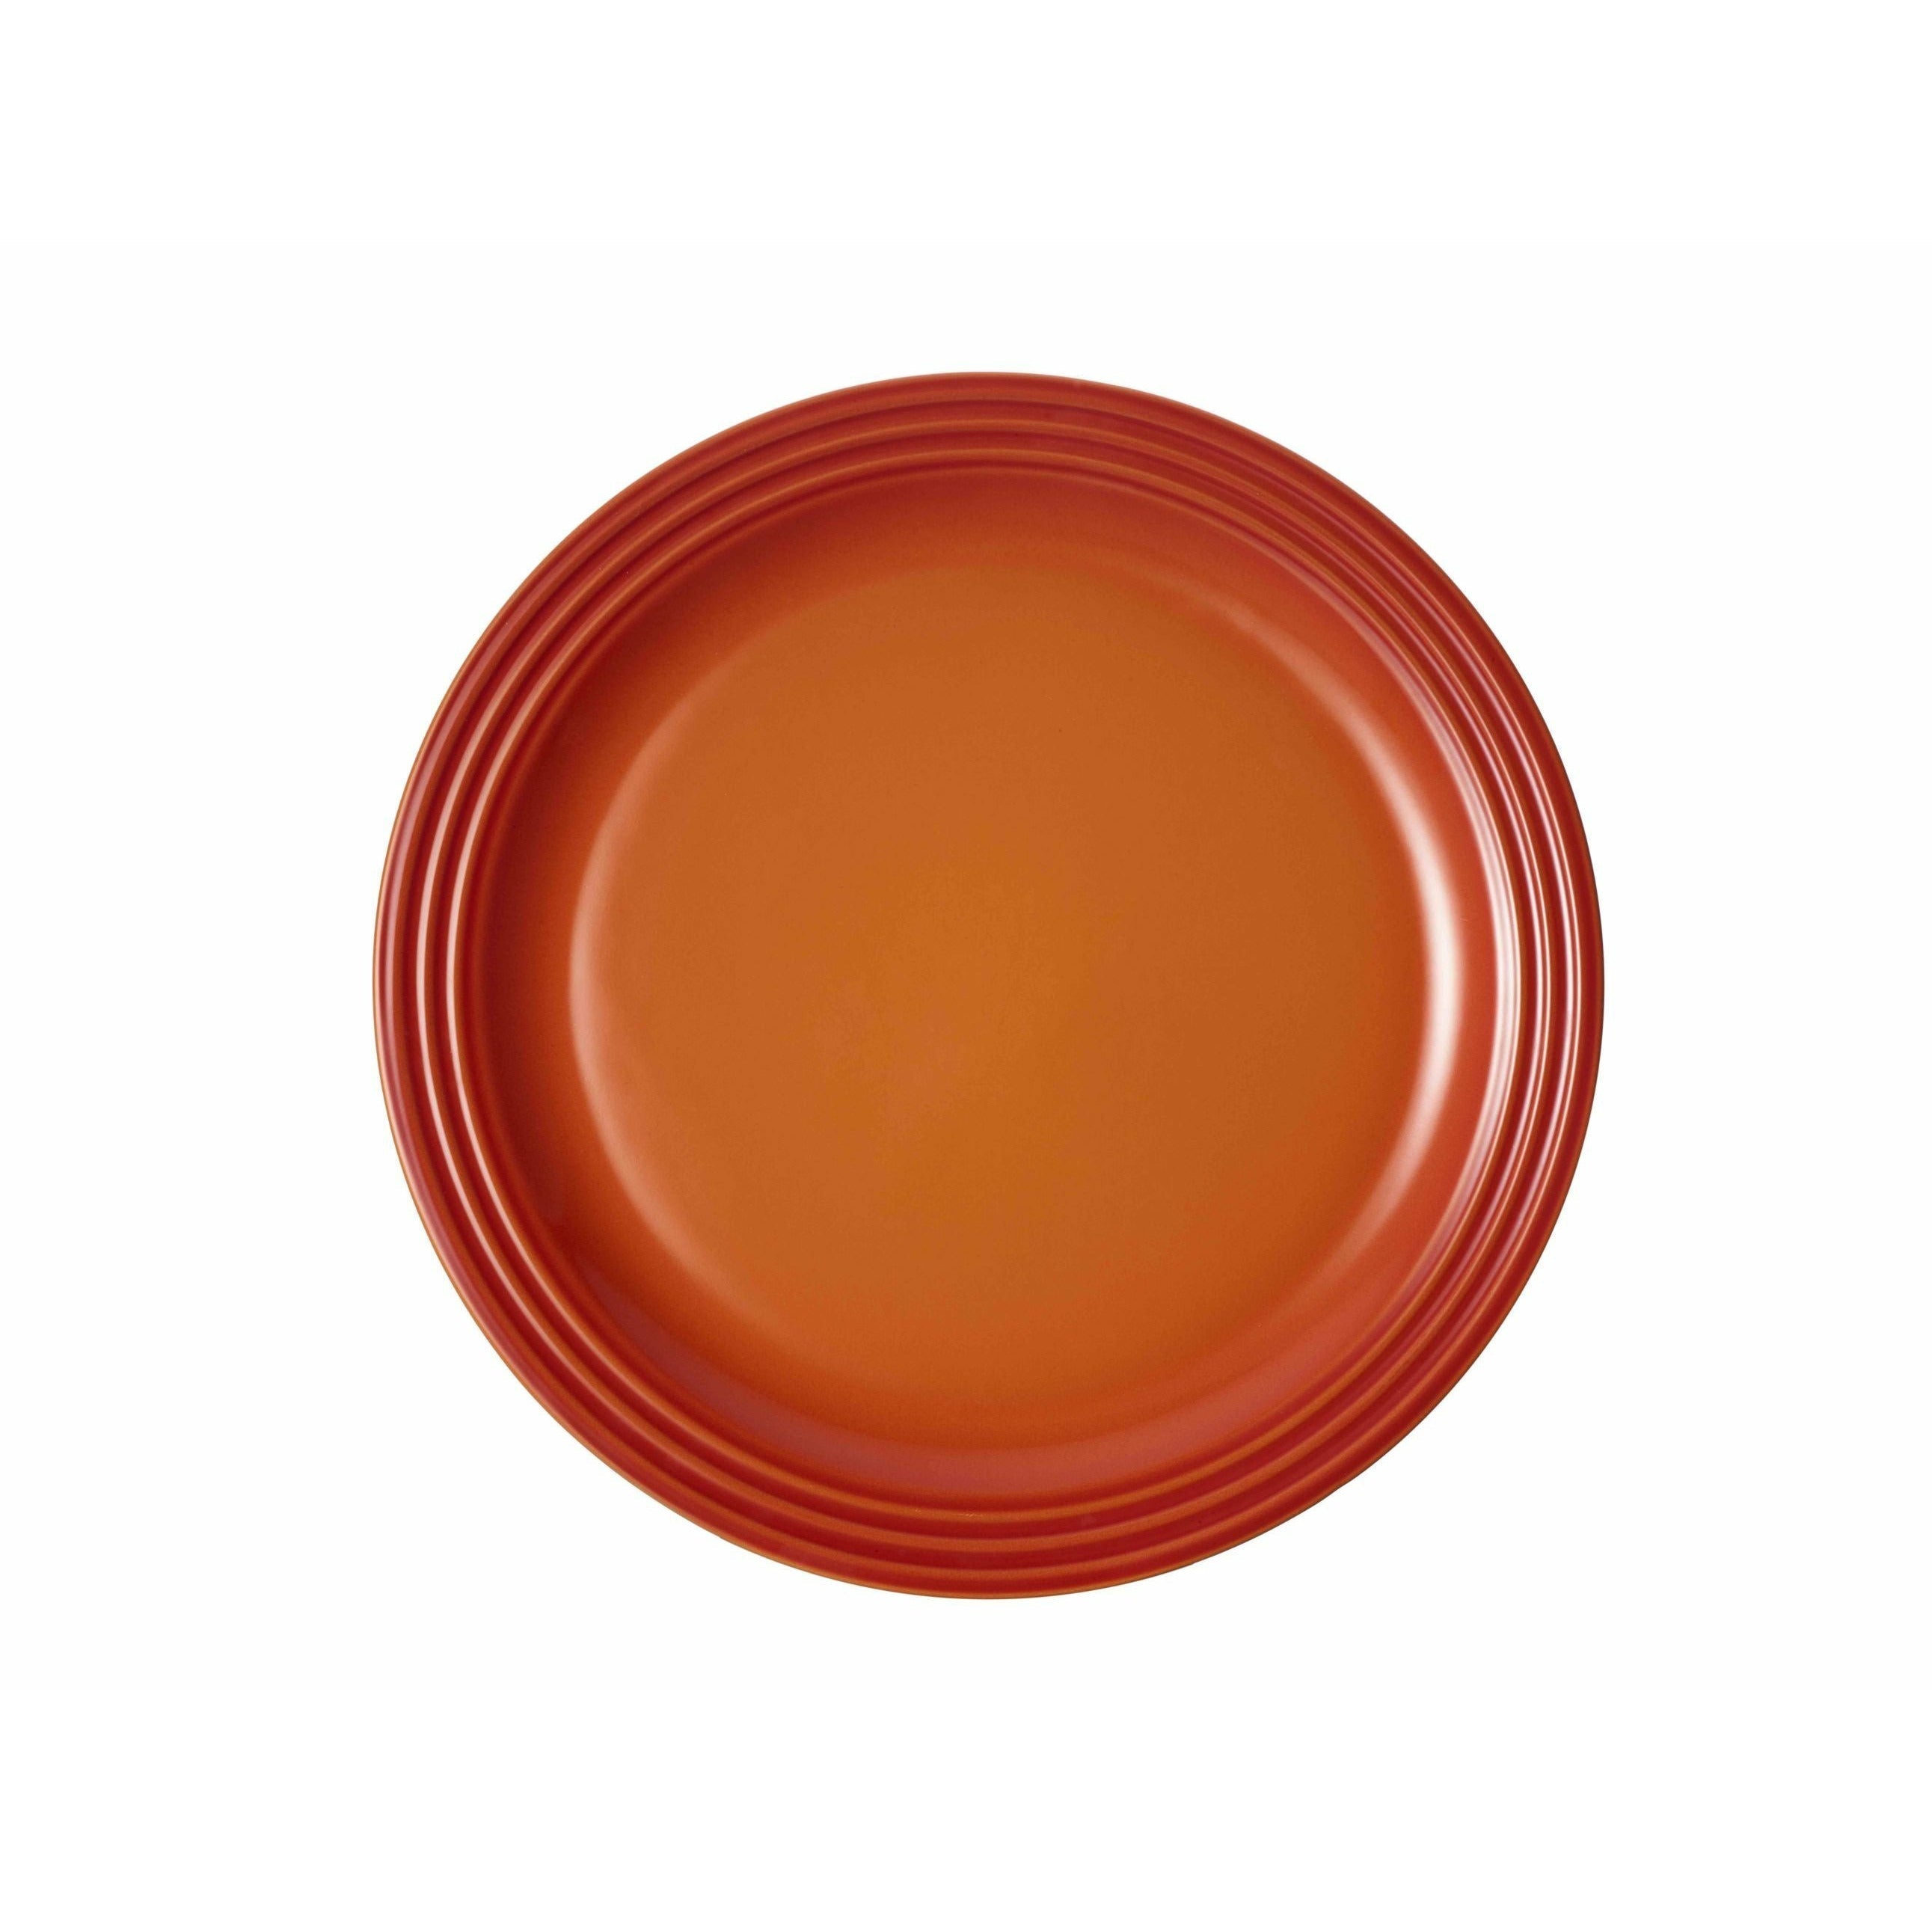 Le Creuset Kenmerkend bord 27 cm, oven rood